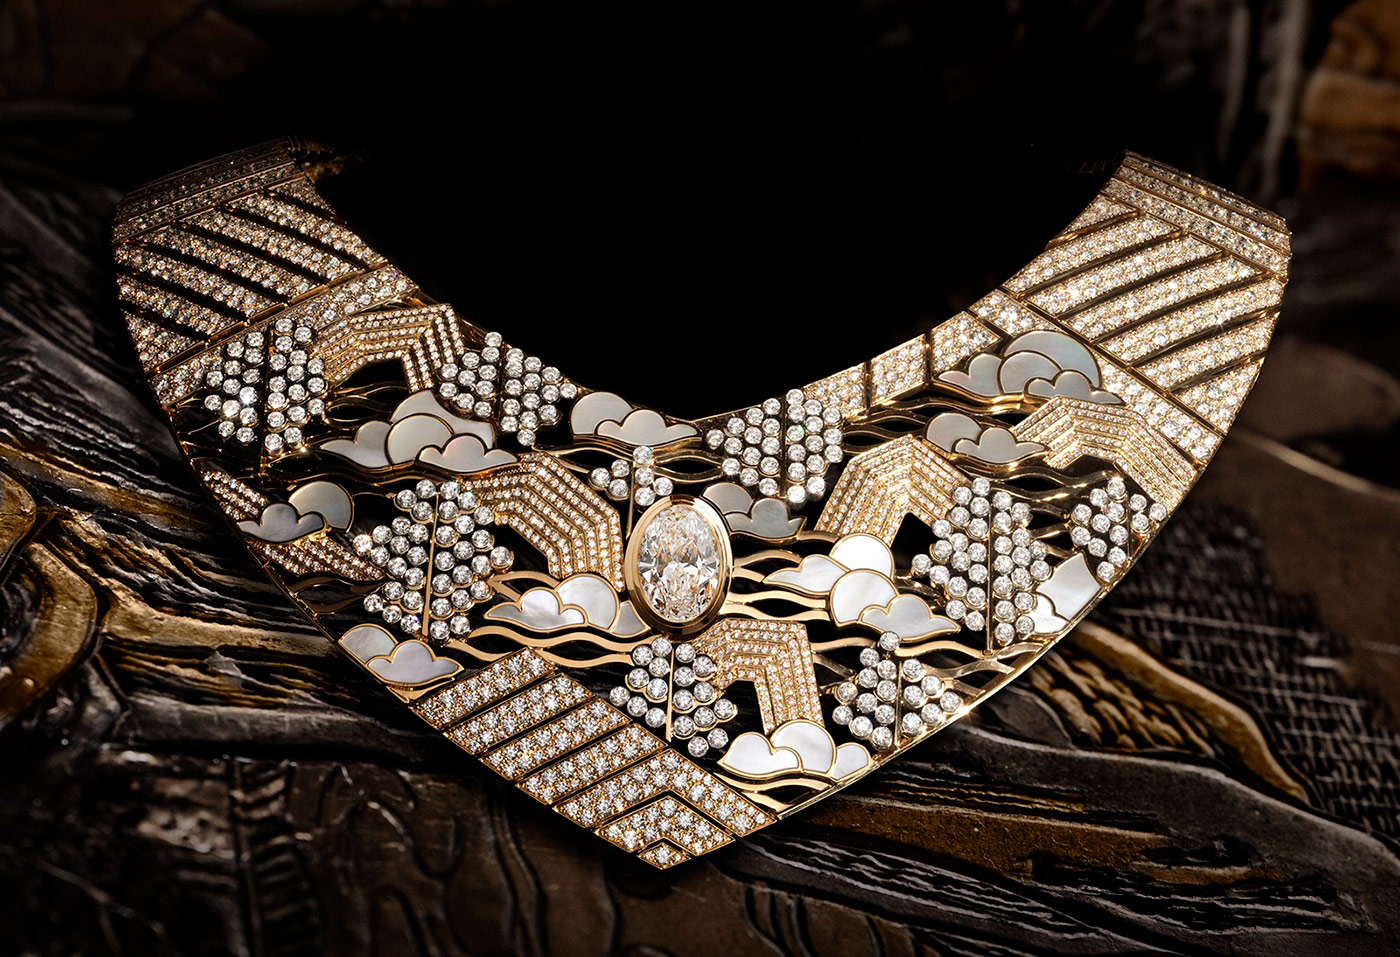 Chanel ‘Horizon Lointain’ necklace from the 'Coromandel' collection in diamonds, mother of pearl and yellow gold